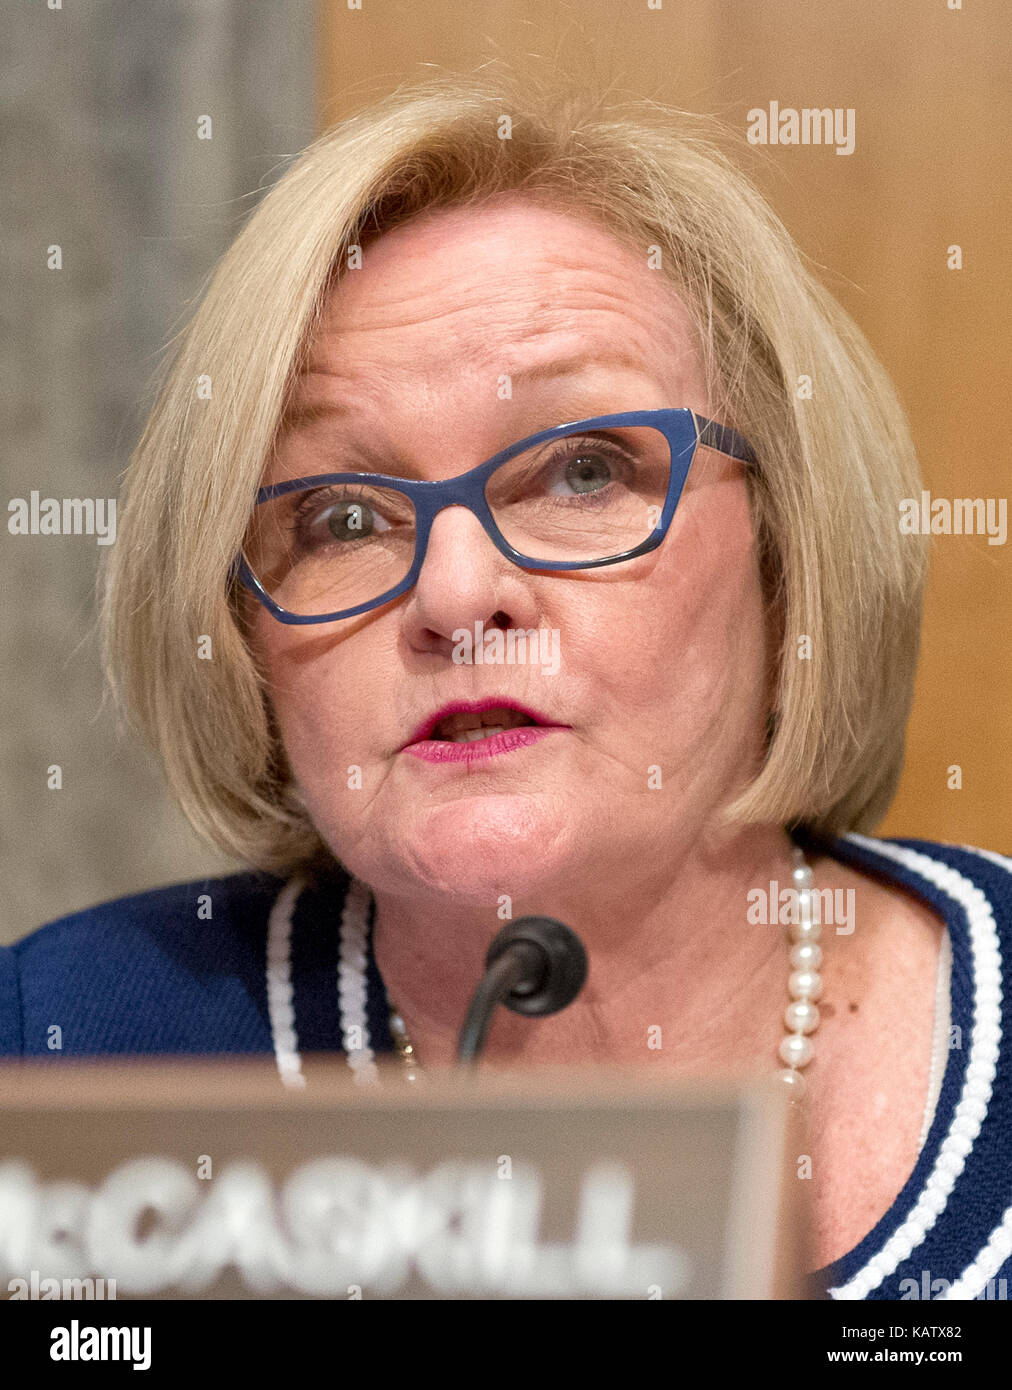 United States Senator Claire McCaskill (Democrat of Missouri) listens to testimony before the United States Senate Committee Homeland Security and Governmental Affairs on 'Threats to the Homeland' on Capitol Hill in Washington, DC on Wednesday, September 27, 2017. Credit: Ron Sachs/CNP /MediaPunch Stock Photo